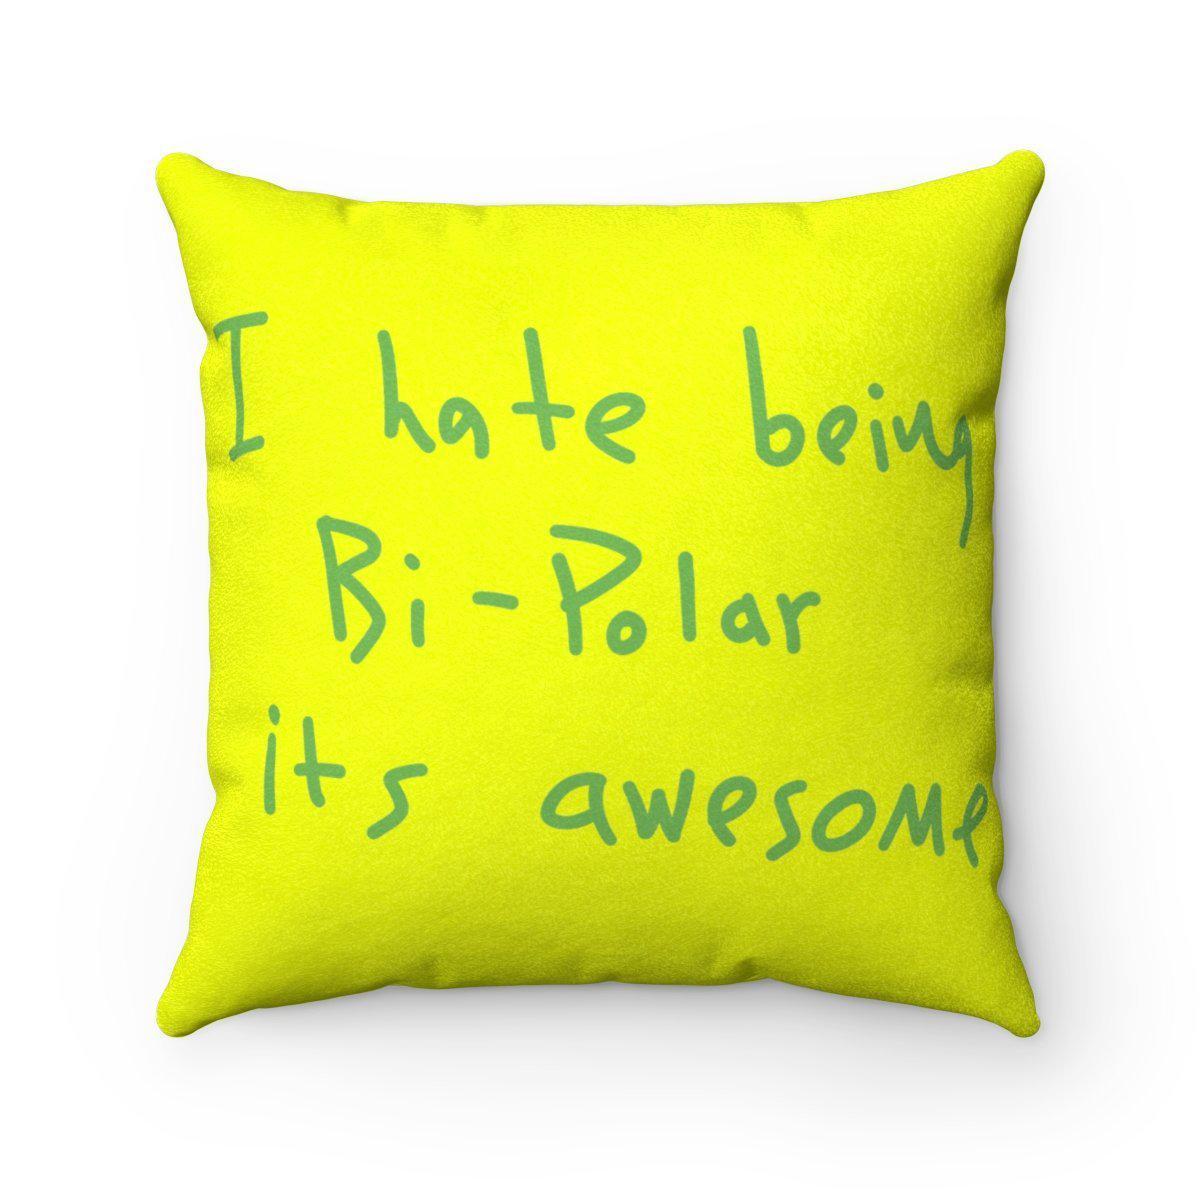 I Hate Being Bi-Polar It's Awesome Kanye West inspired Faux Suede Square Pillow-Archethype